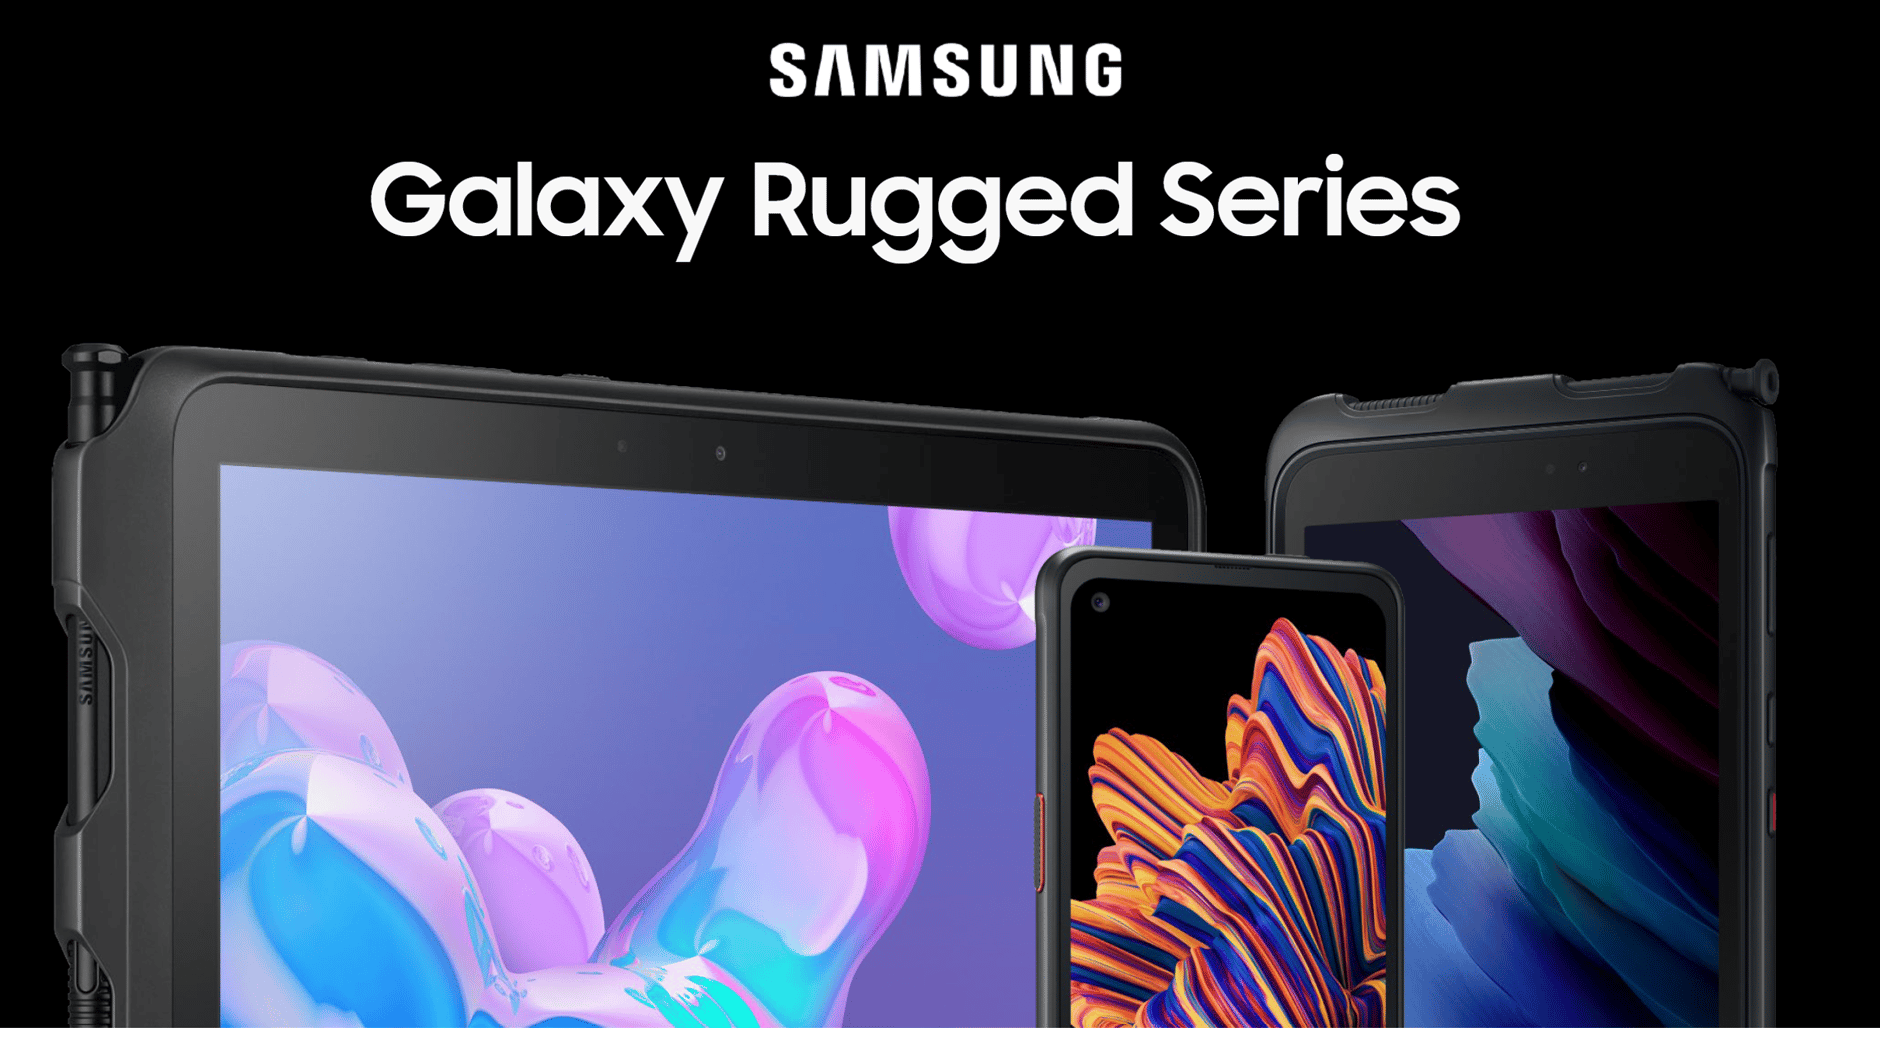 New Samsung Business Rugged devices target field, factory, and frontline